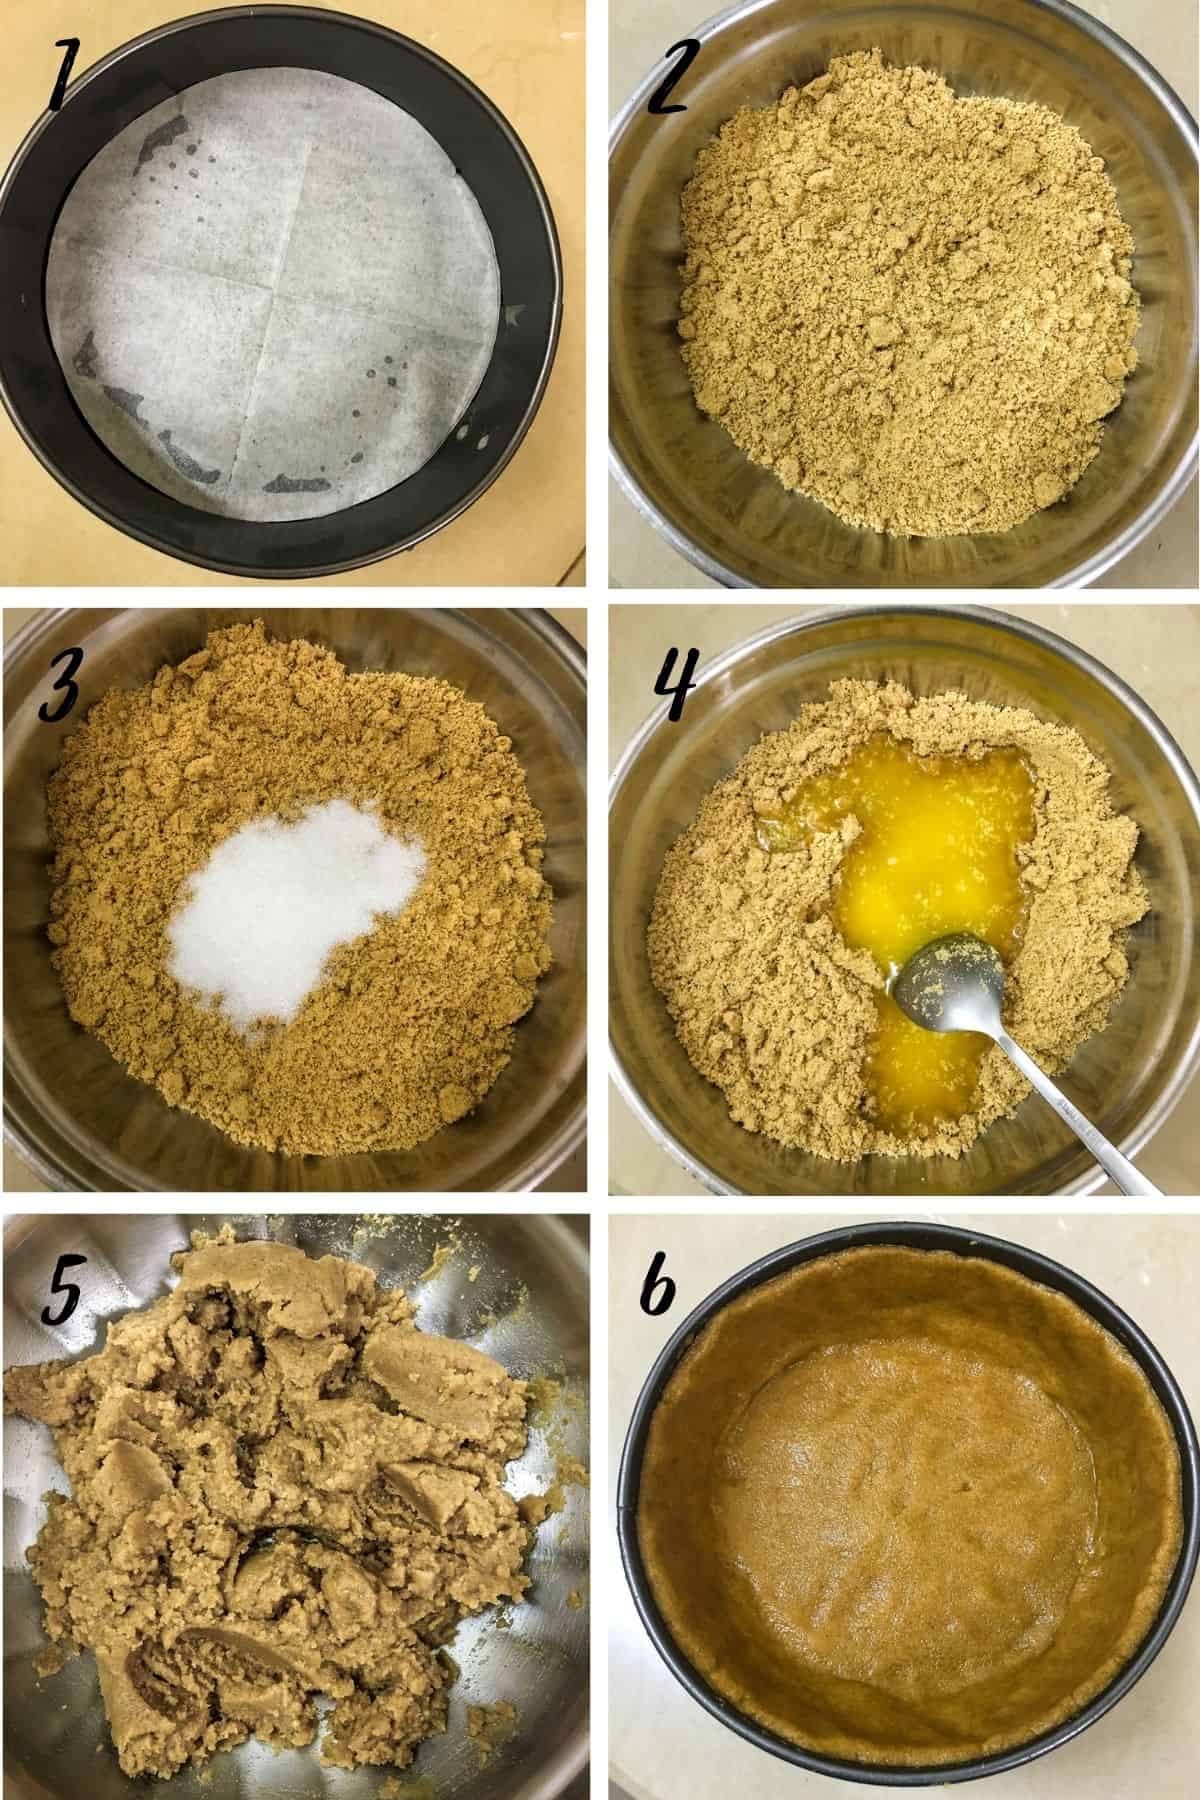 A poster of 6 images showing how to make cheesecake crust